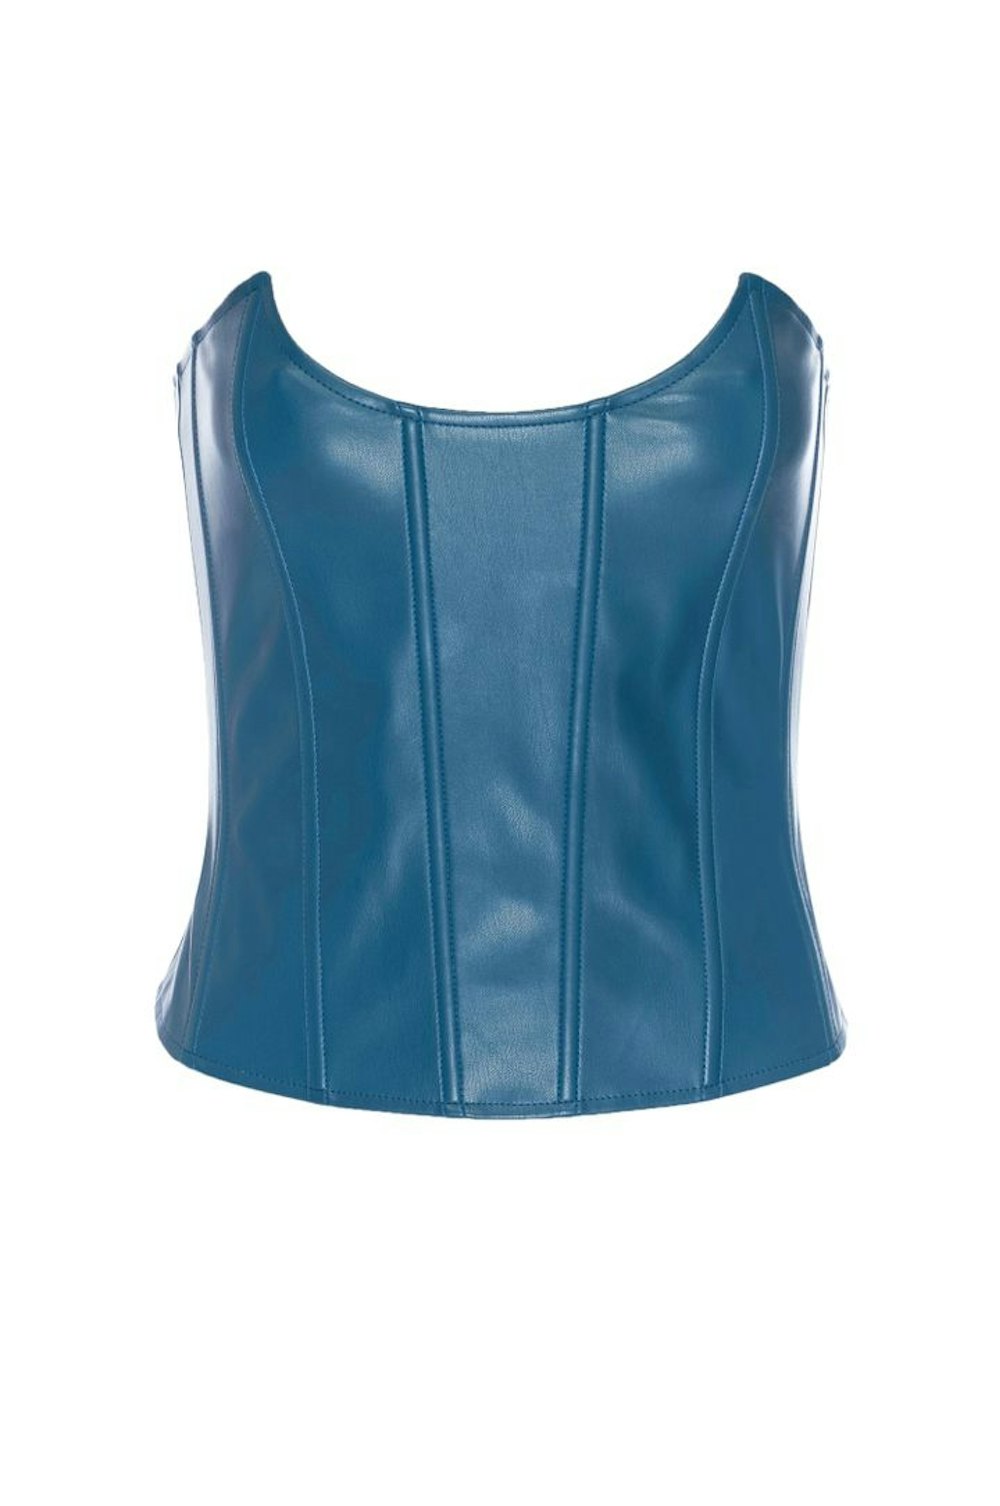 Leia Corset in Teal Leather